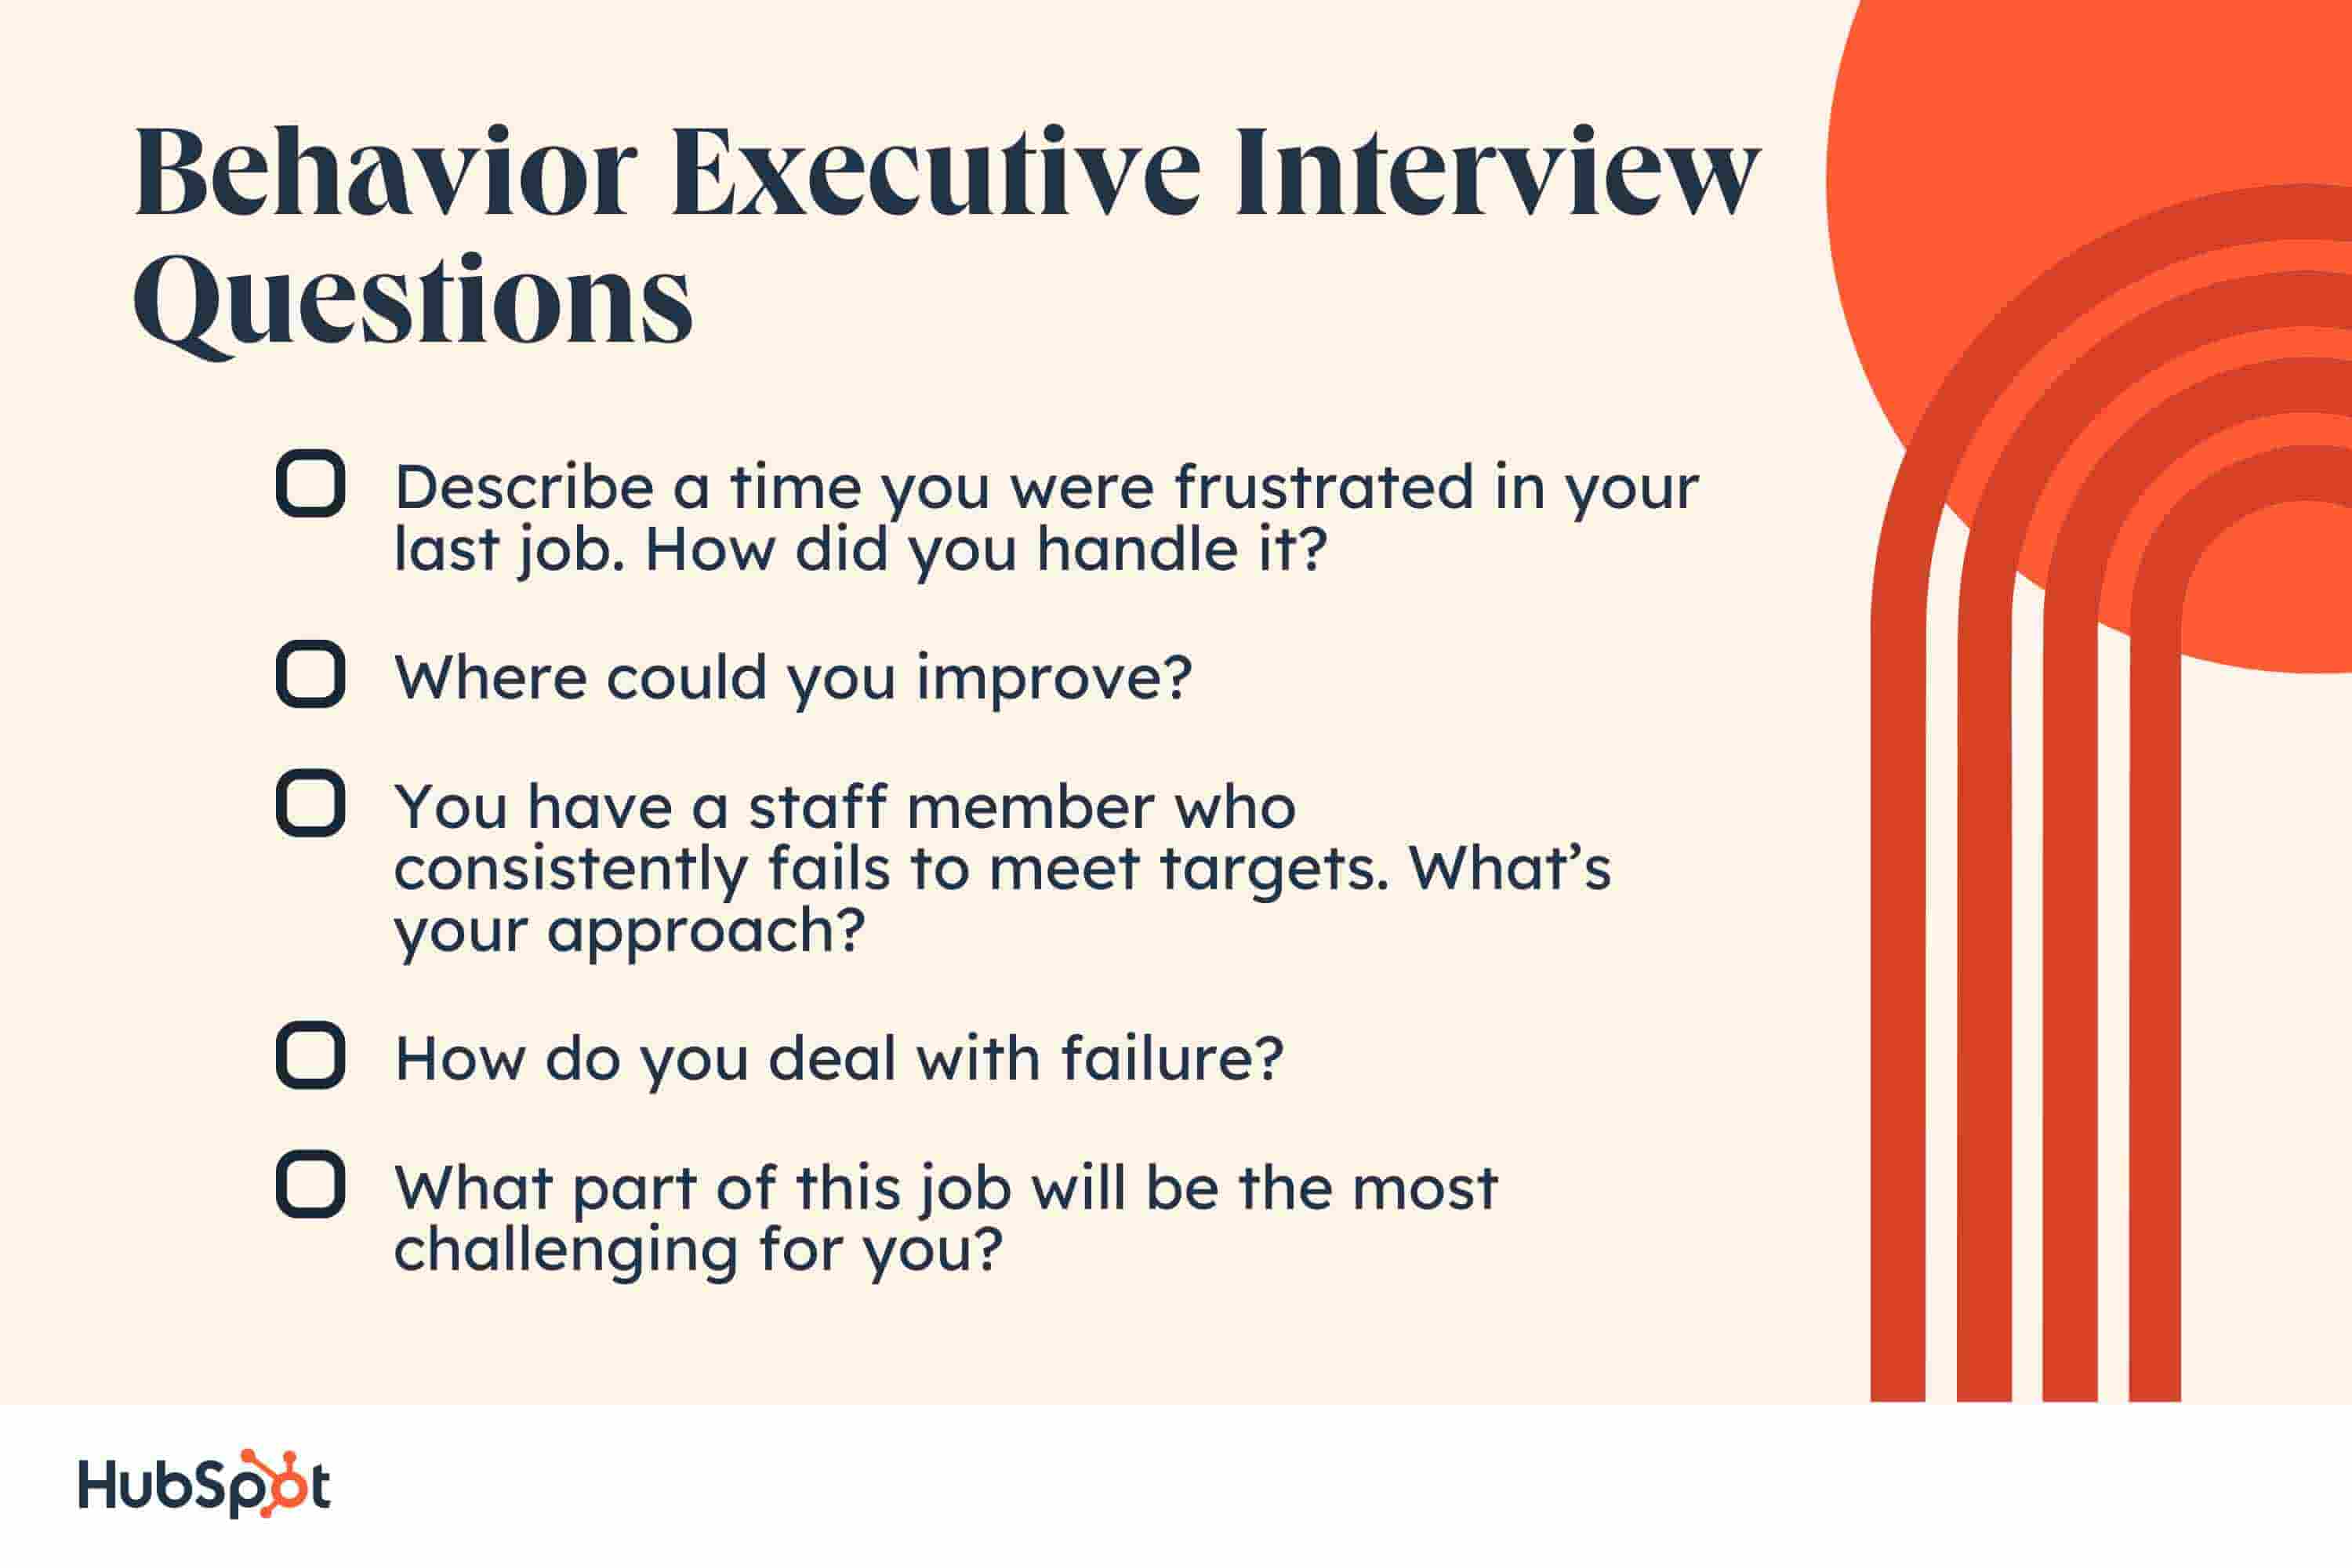 behavior executive interview questions. Describe a time you were frustrated in your last job — how did you handle it? Where could you improve? You have a staff member who consistently fails to meet targets. What’s your approach? How do you deal with failure? What part of this job will be the most challenging for you?